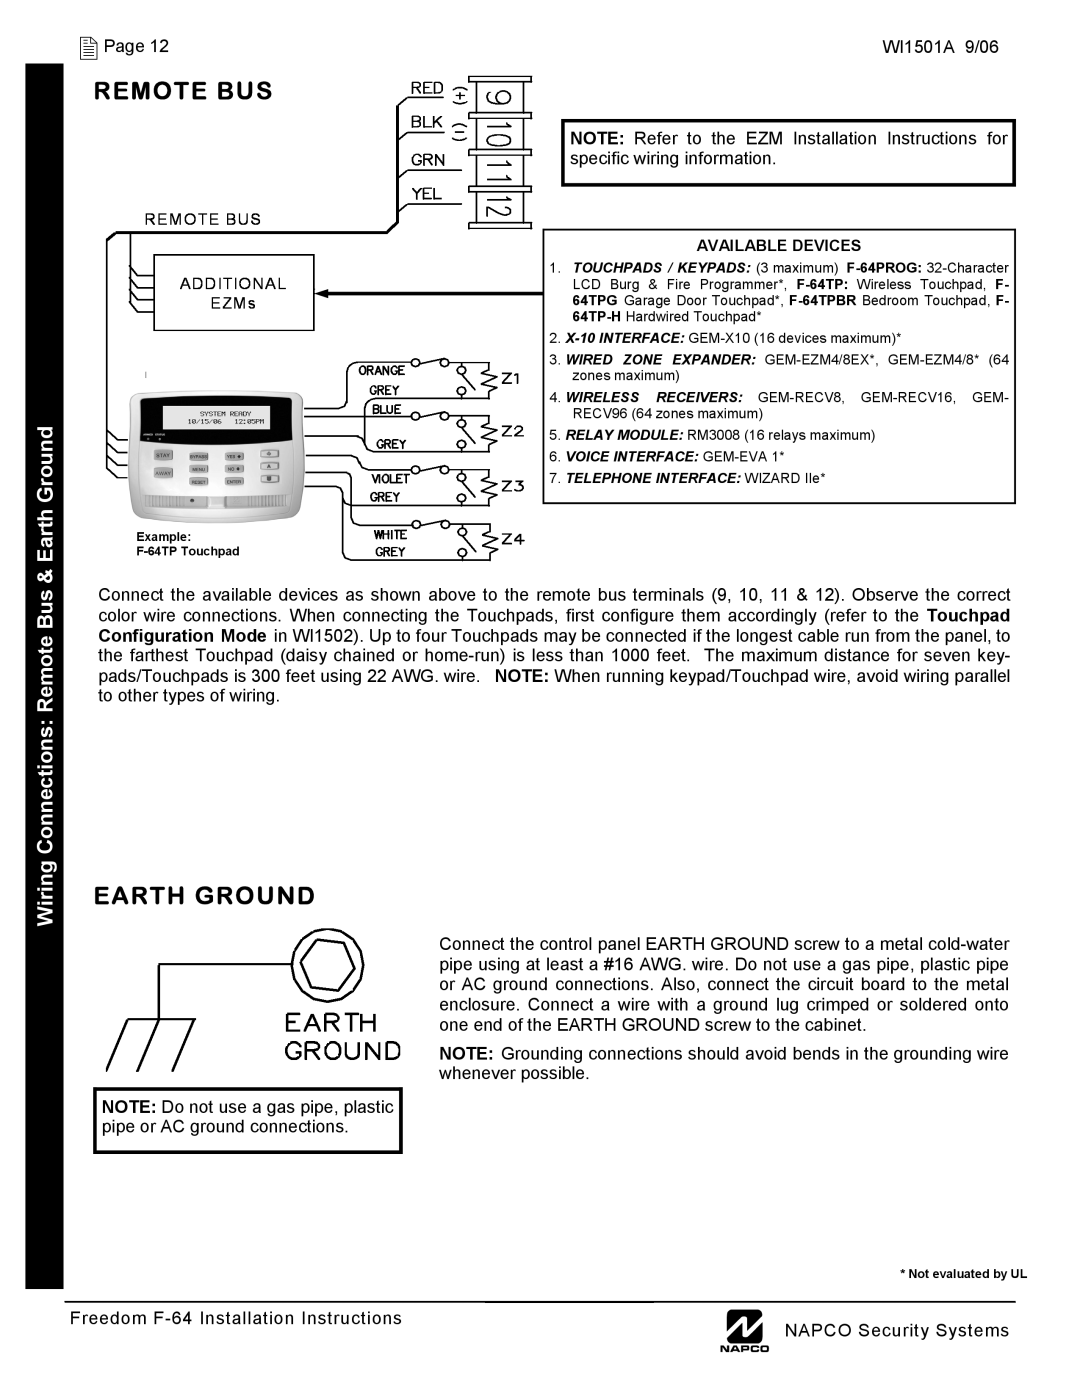 Napco Security Technologies WI1501A installation instructions Earth Ground, Wiring Connections Remote Bus 